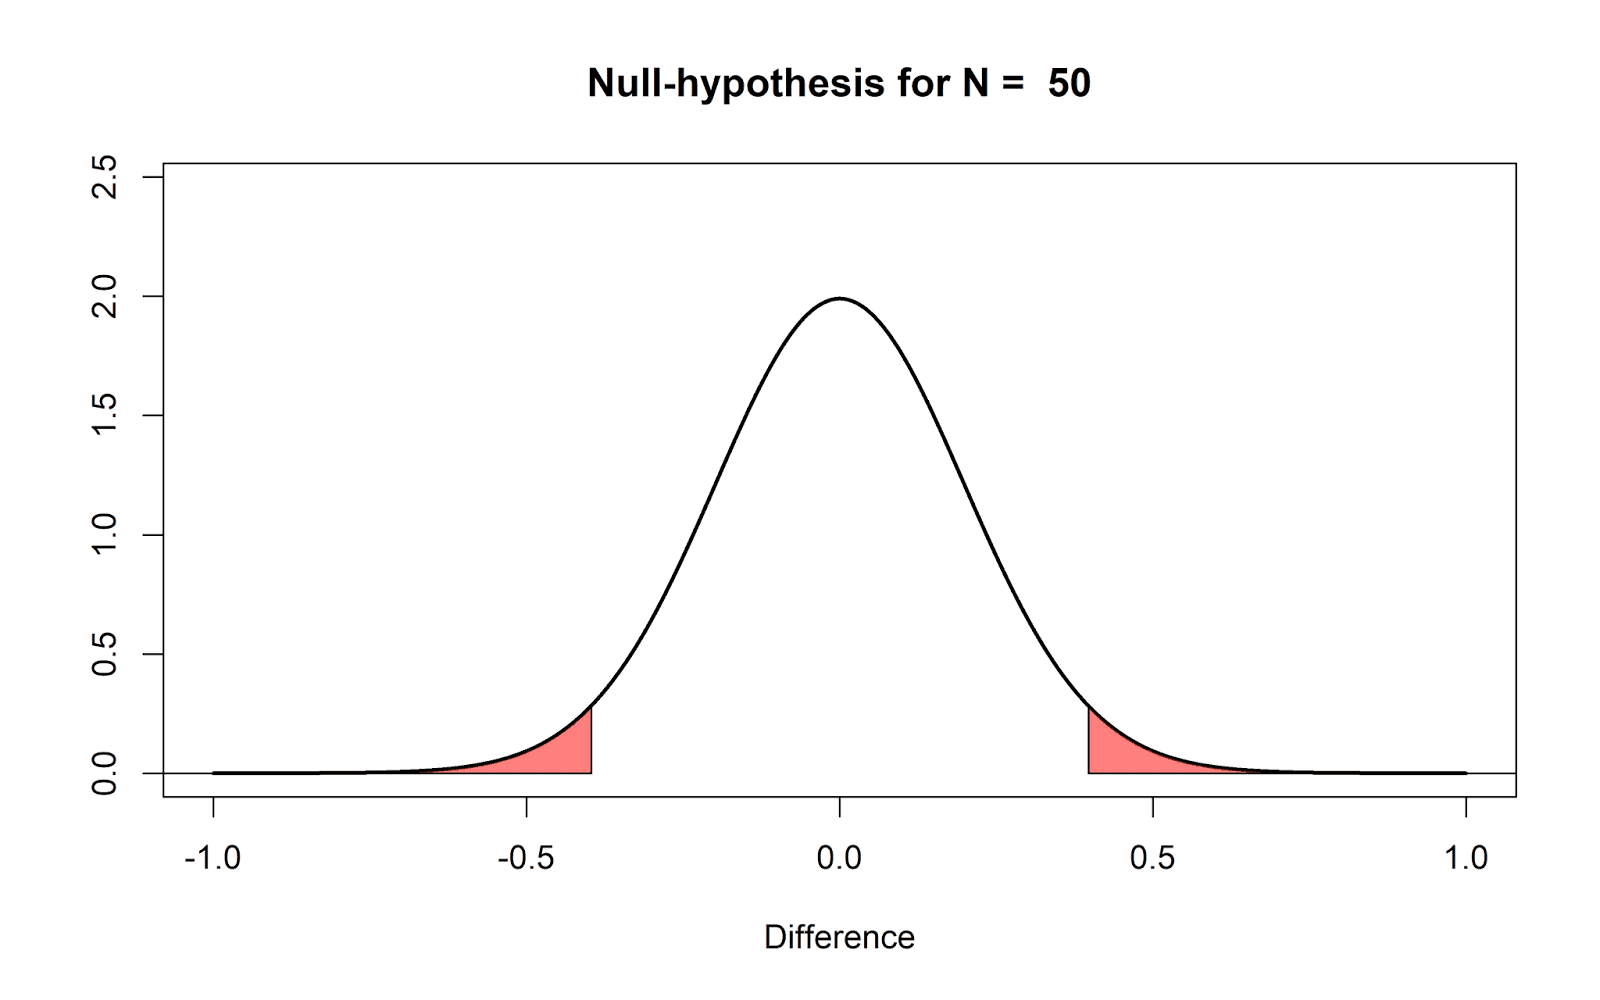 p-values plotted and explained